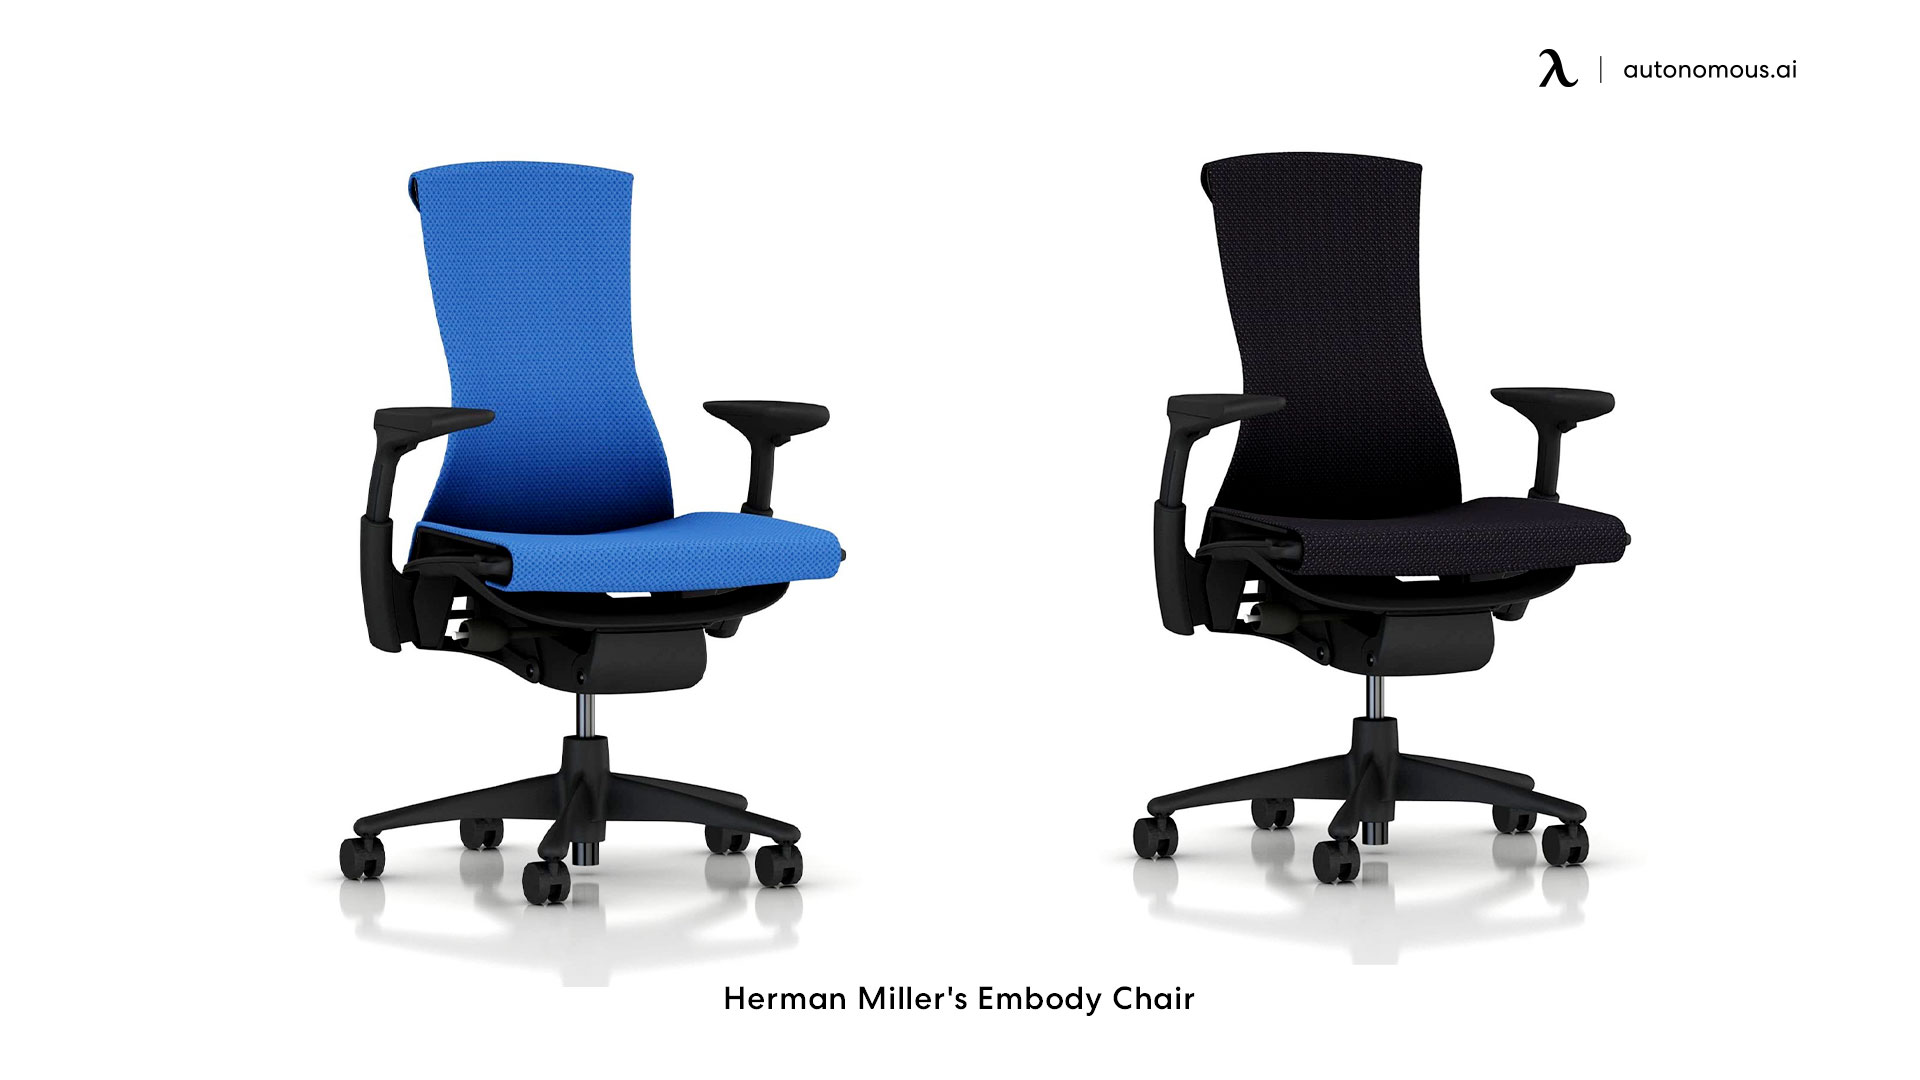 Embody Gaming Chair by Herman Miller and Logitech